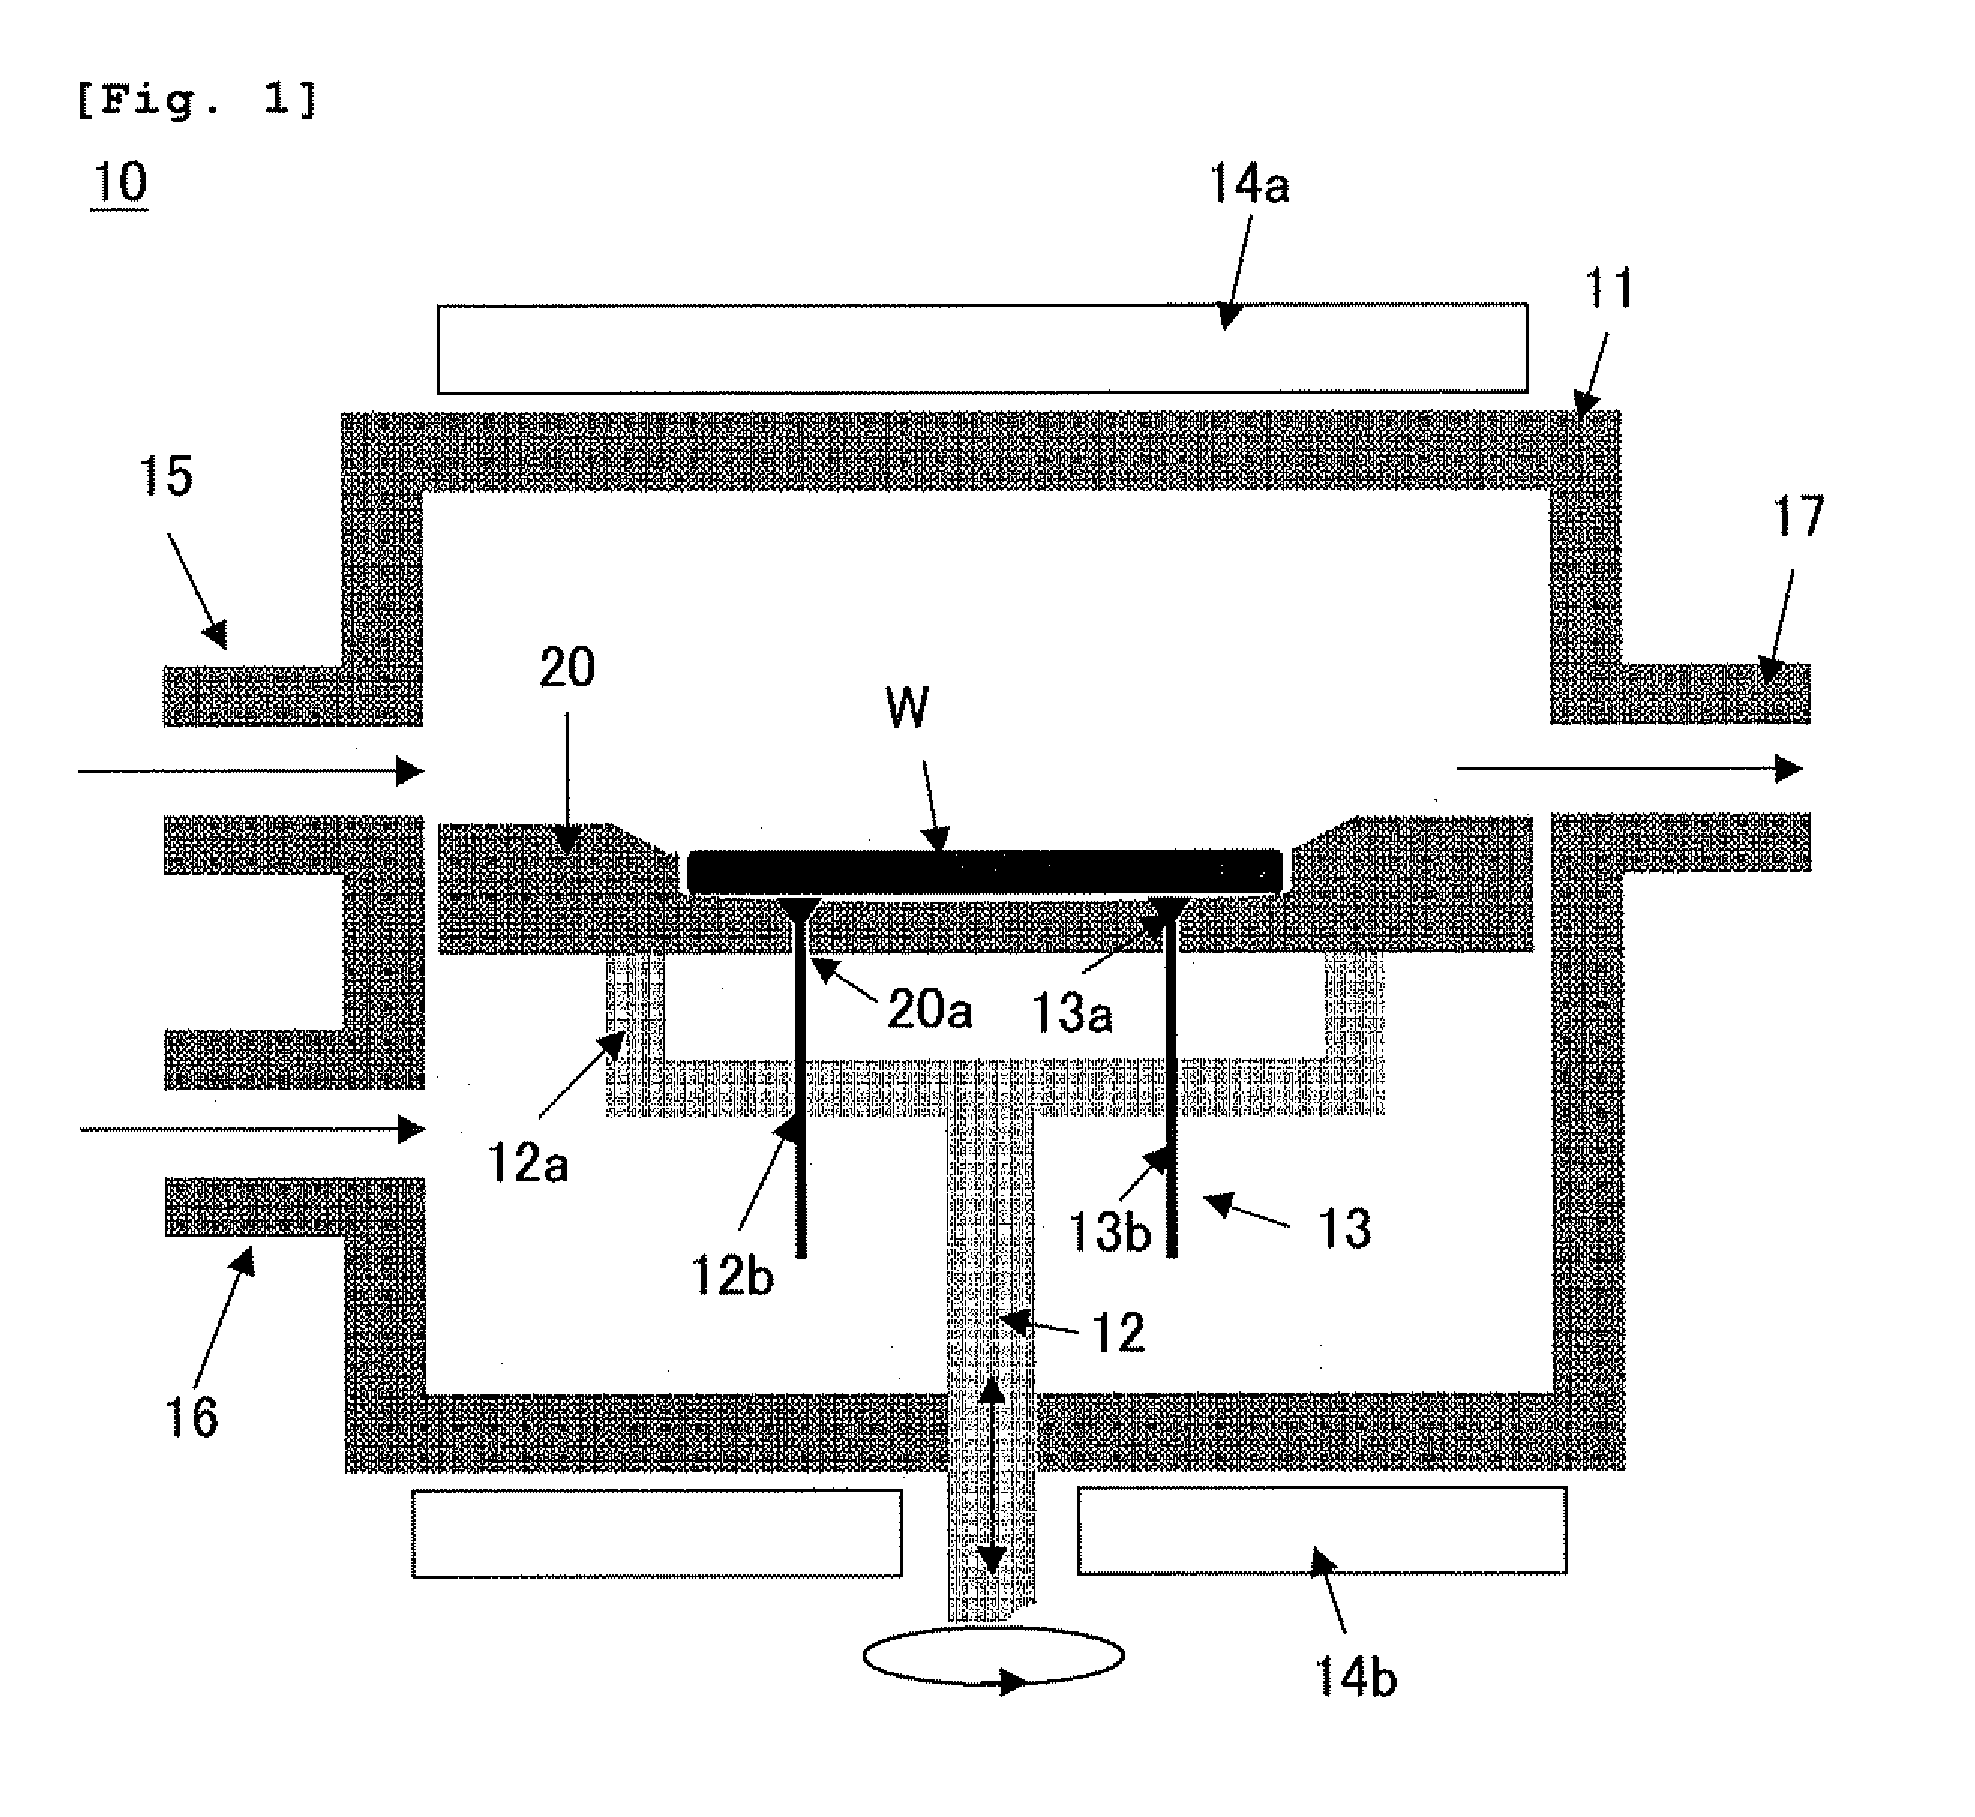 Vapor-phase growth semiconductor substrate support susceptor, epitaxial wafer manufacturing apparatus, and epitaxial wafer manufacturing method